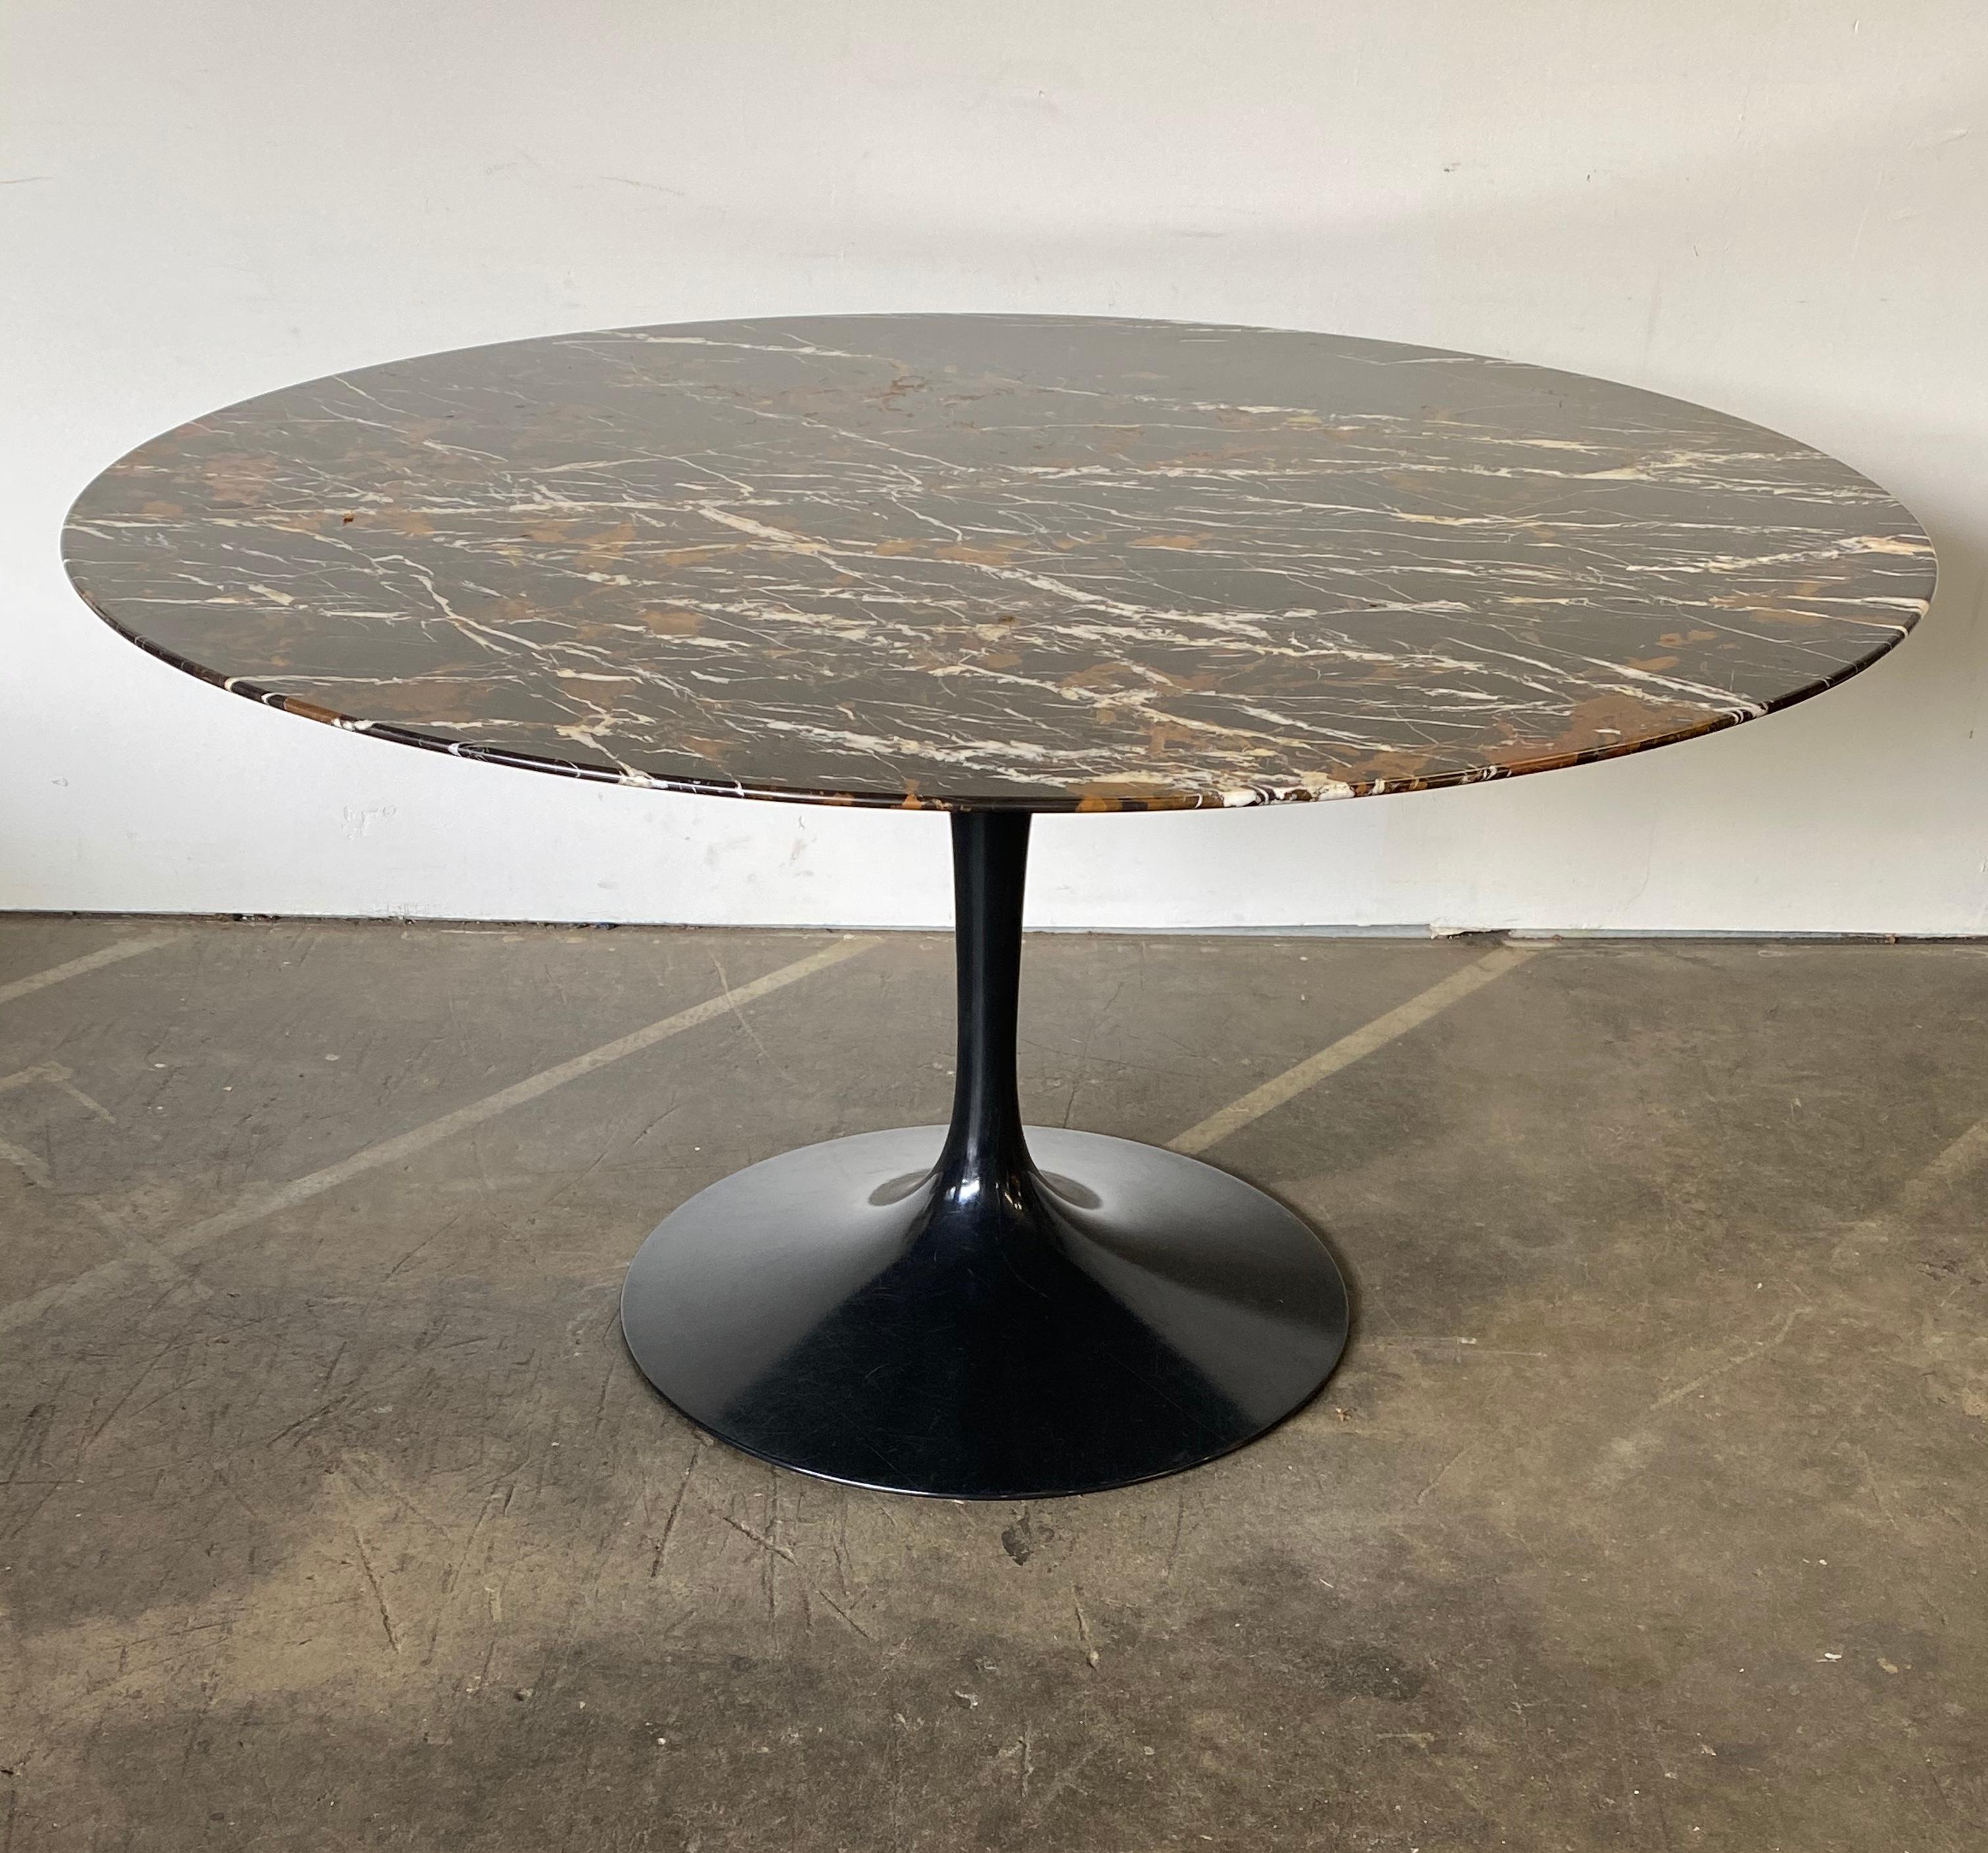 Spectacular round dining table by Eero Saarinen for Knoll. Signed and guaranteed authentic. Show stopping colors and veining adorn this marble slap atop black powder-coated aluminum base. Size: 54 inches in diameter. Accommodates 6 chairs.